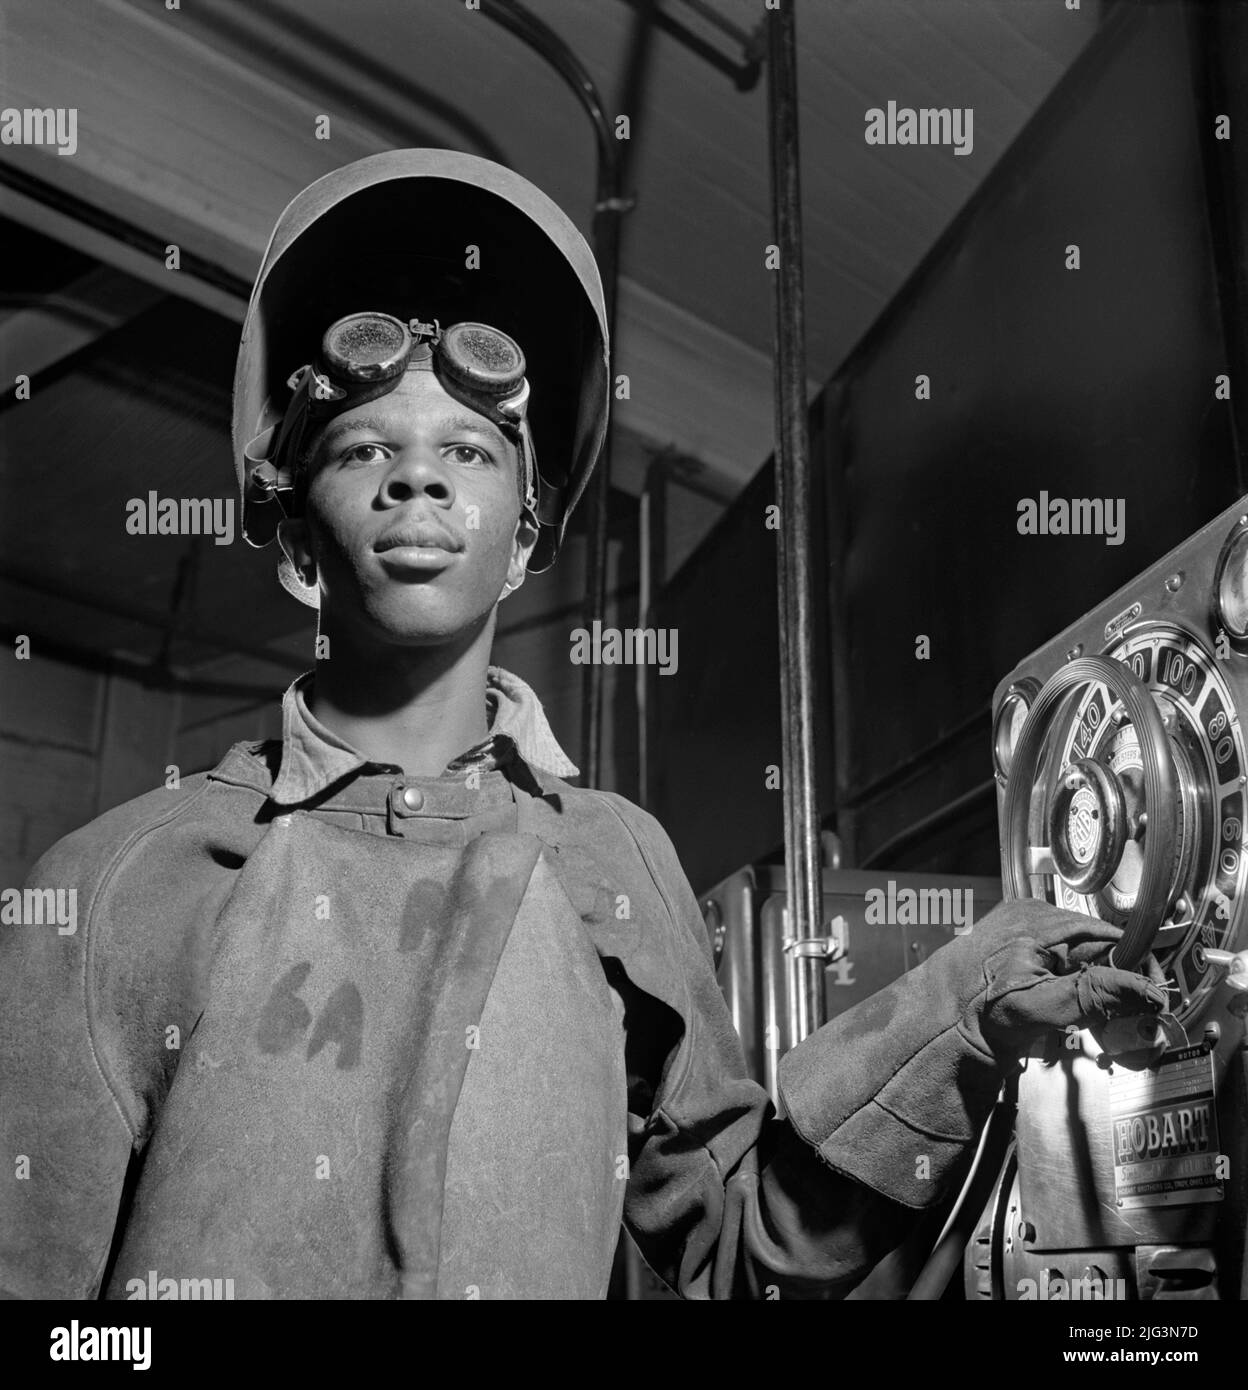 Young Adult Man receiving training in arc welding, National Youth Administration (NYA) Work Center, Brooklyn, New York, USA, Fritz Henle, U.S. Office of War Information/U.S. Farm Security Administration, August 1942 Stock Photo